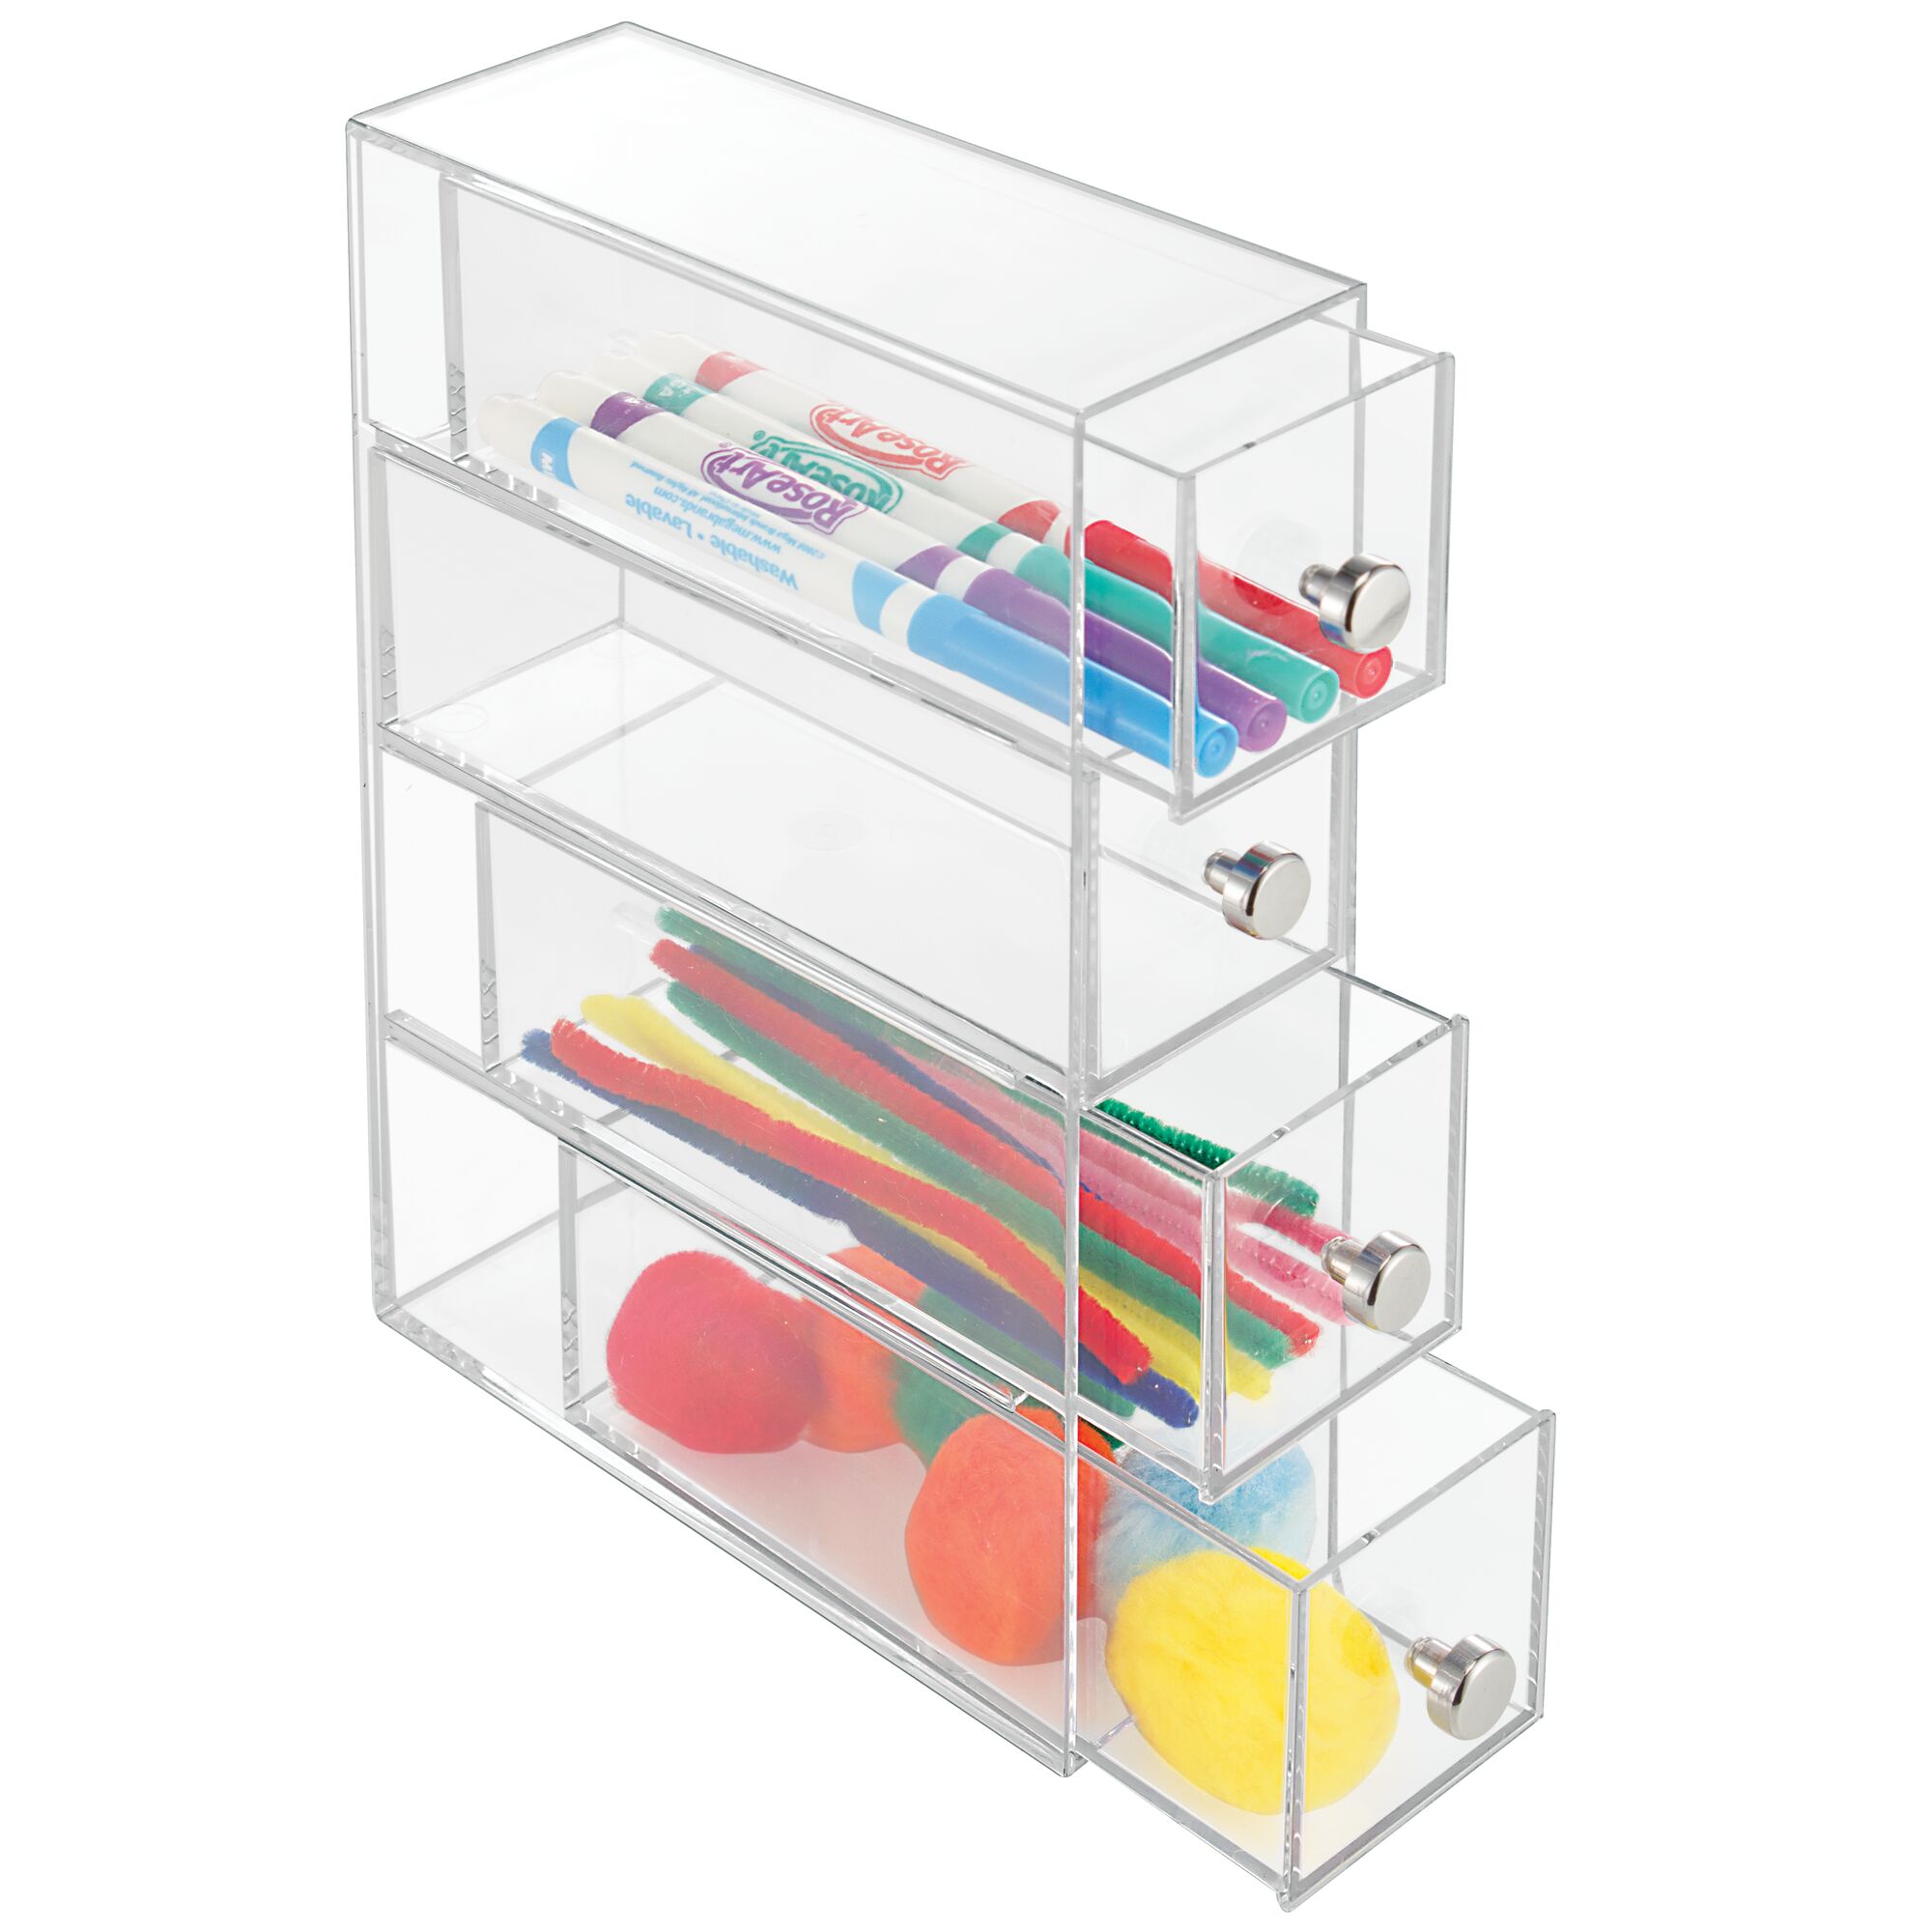 iDesign Clear Storage and Organization 4-Drawer Towers - image 4 of 8